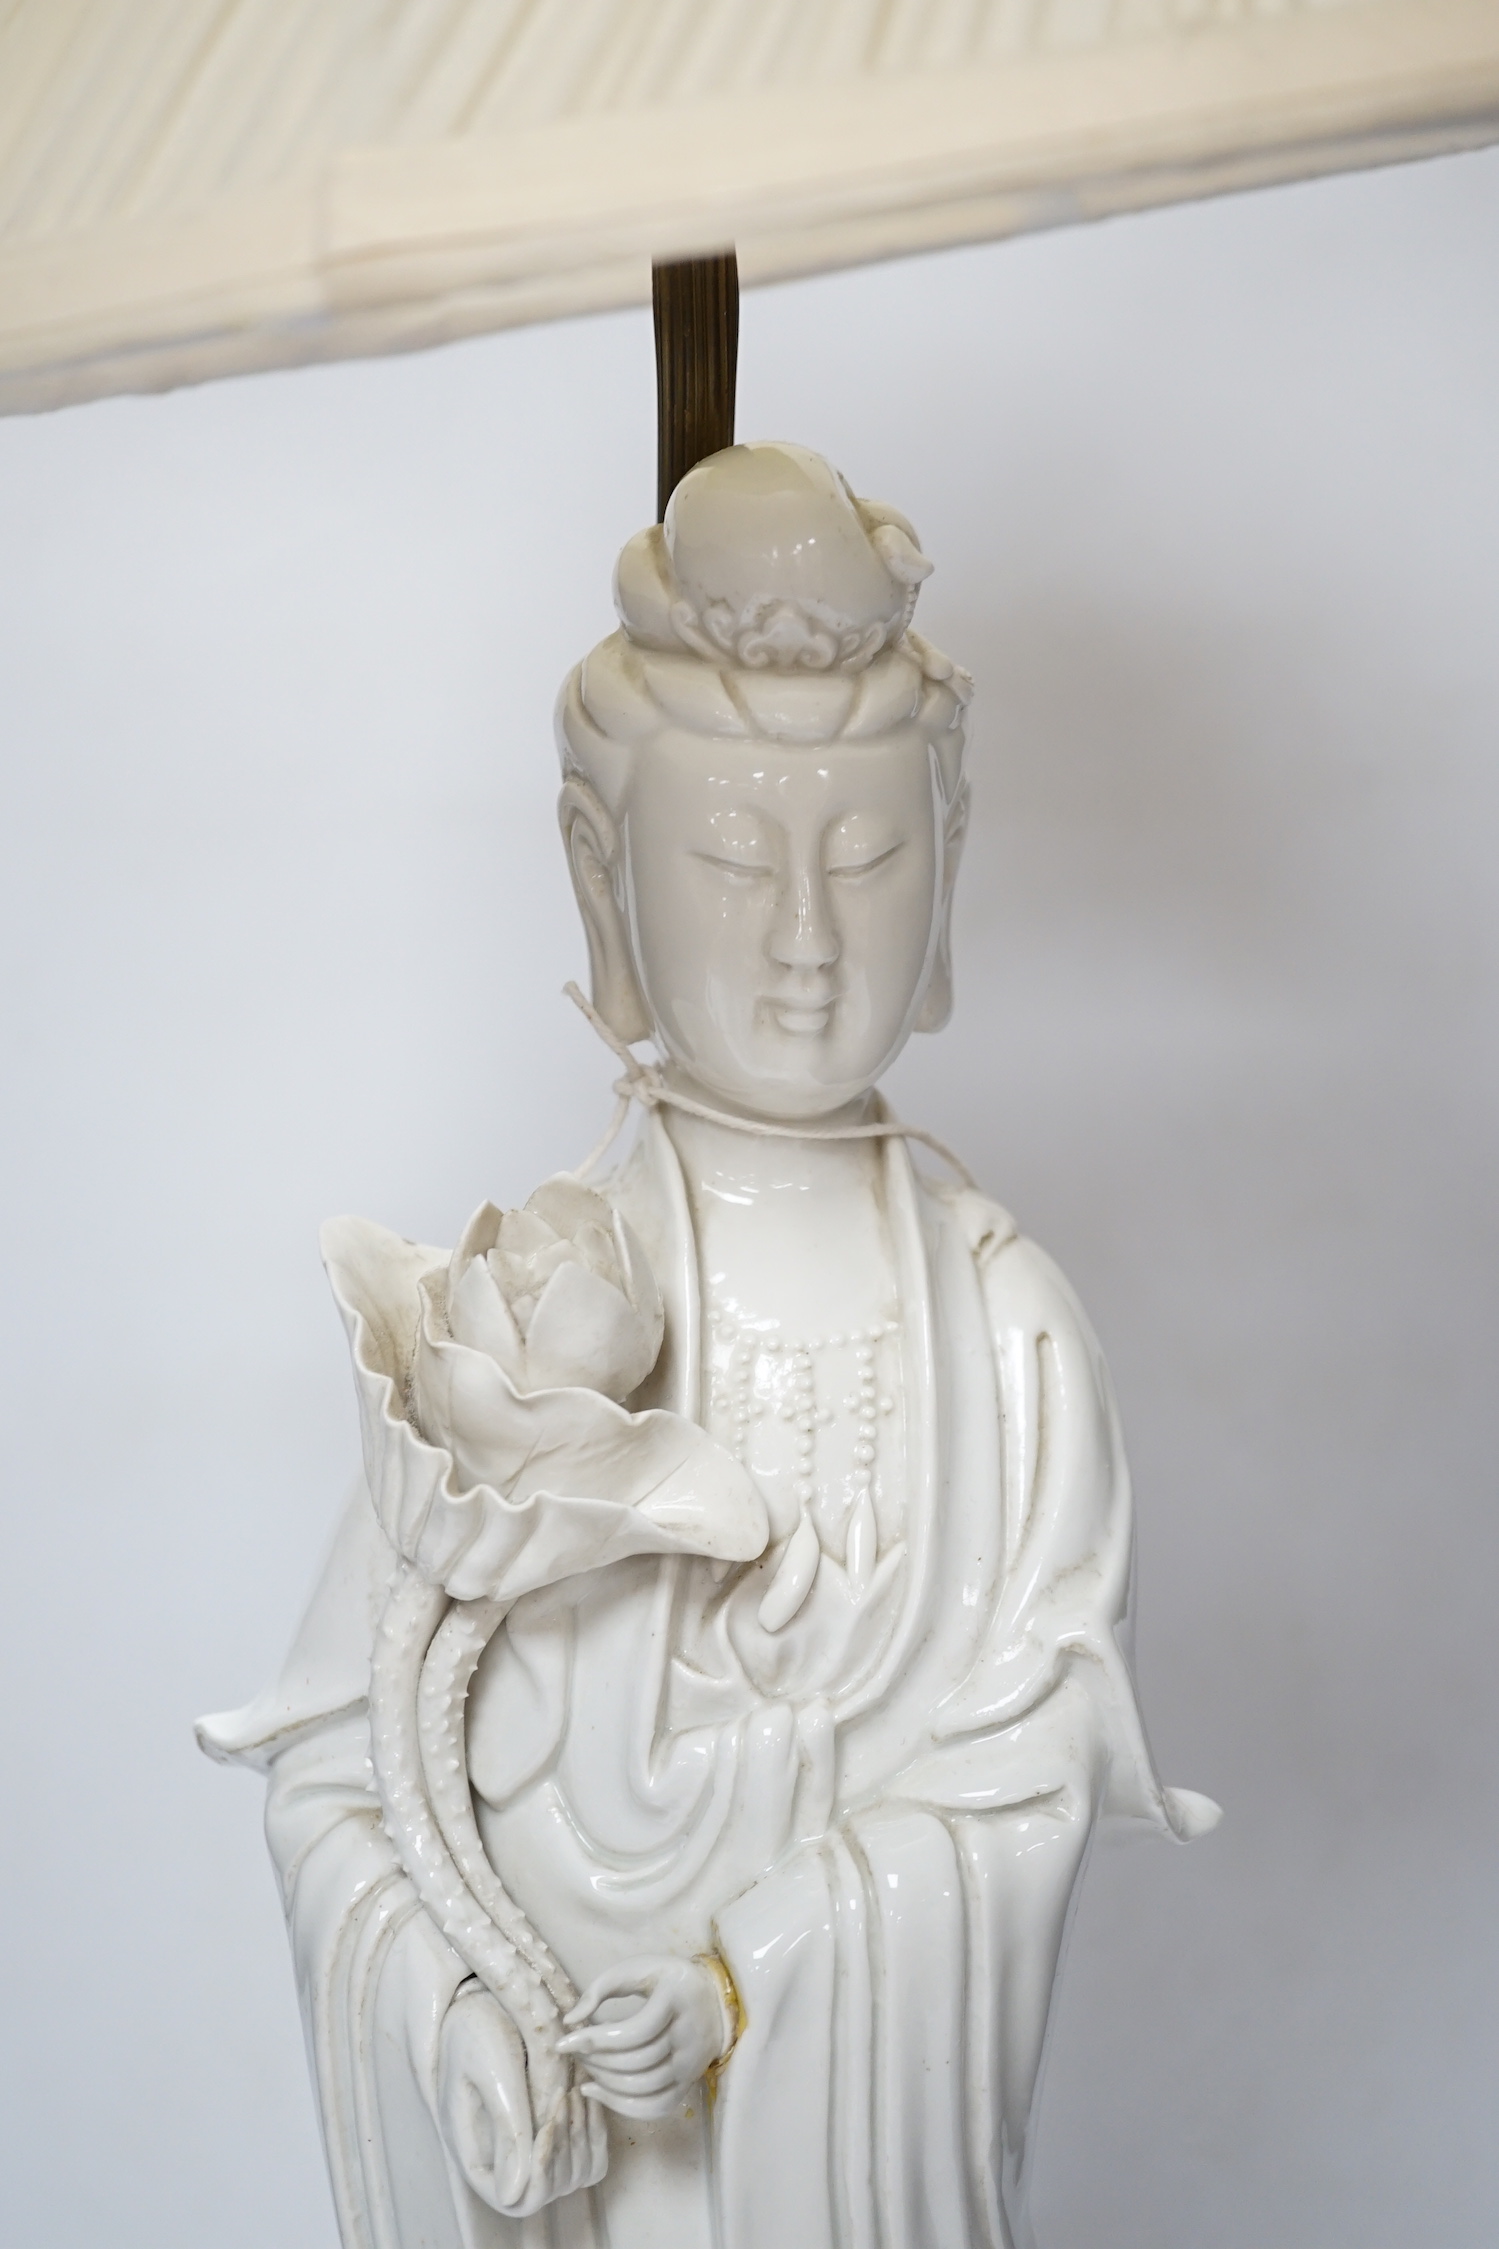 A Chinese blanc de chine figure of Guanyin, 71cm with shade